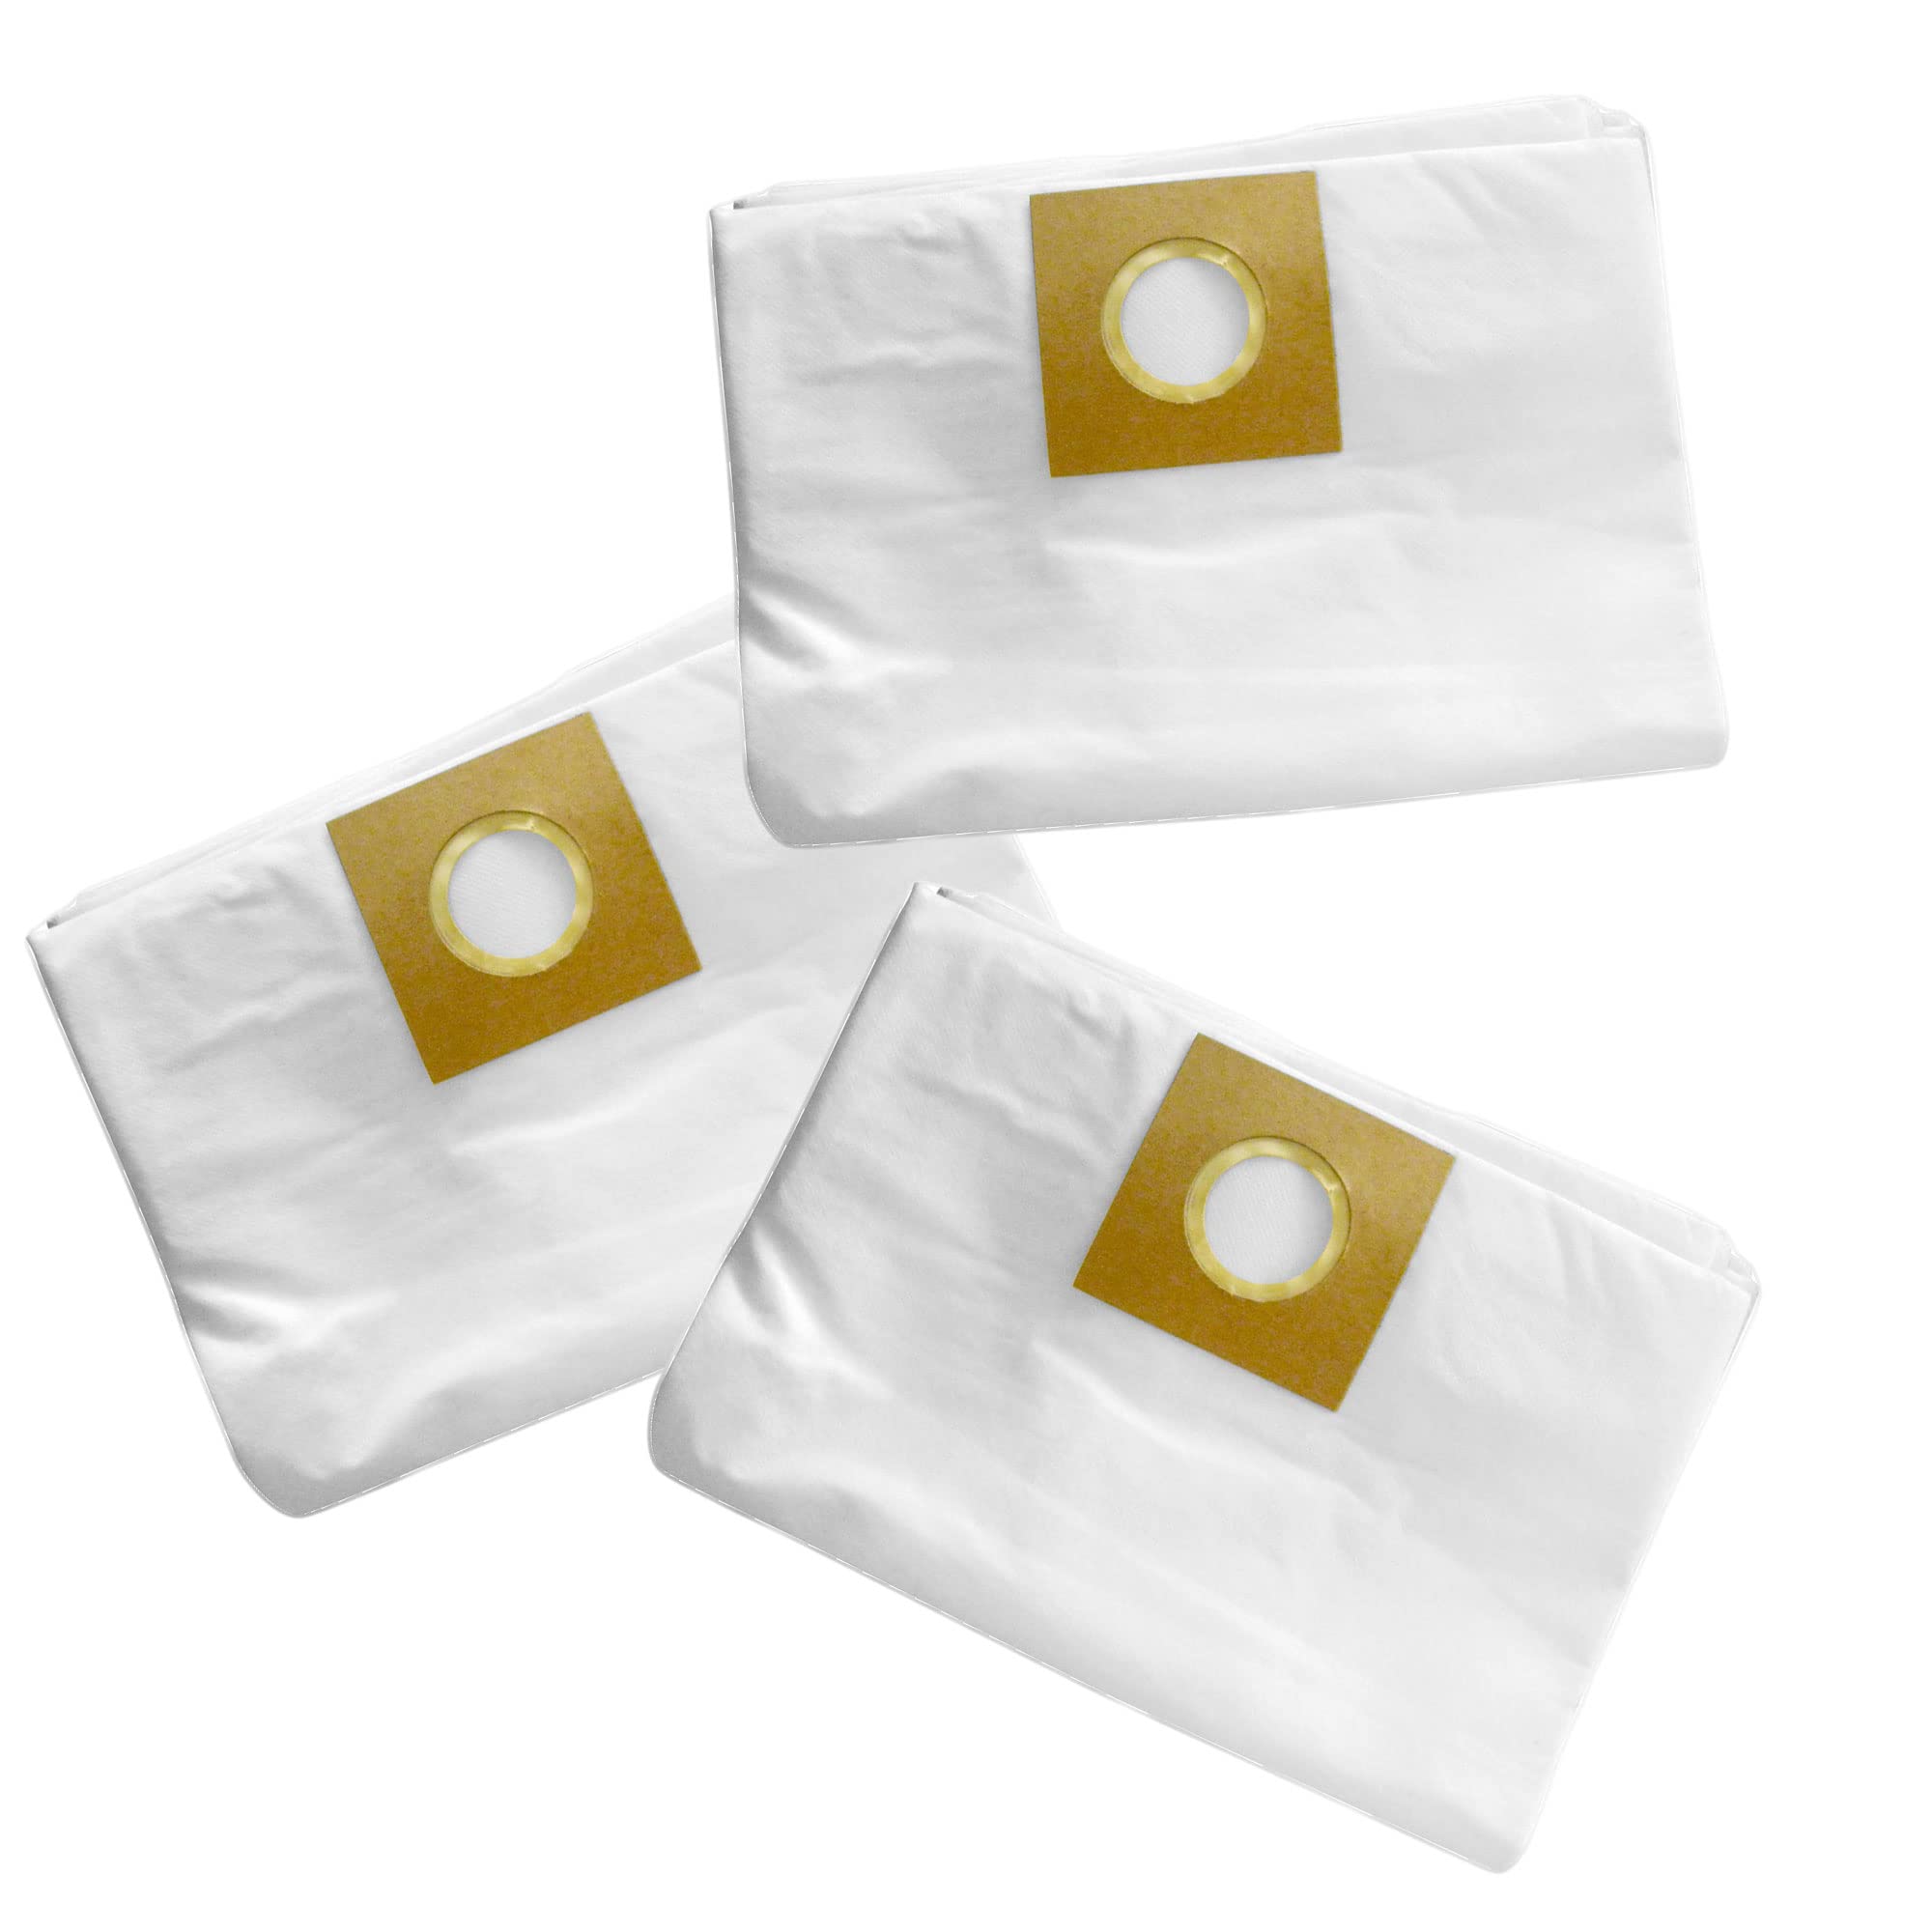 Koblenz 45-1165-00-5 Microfiltration Dustbag, Fits 12 to 16 Gallon Tanks, White,3 Pack, 3 Each